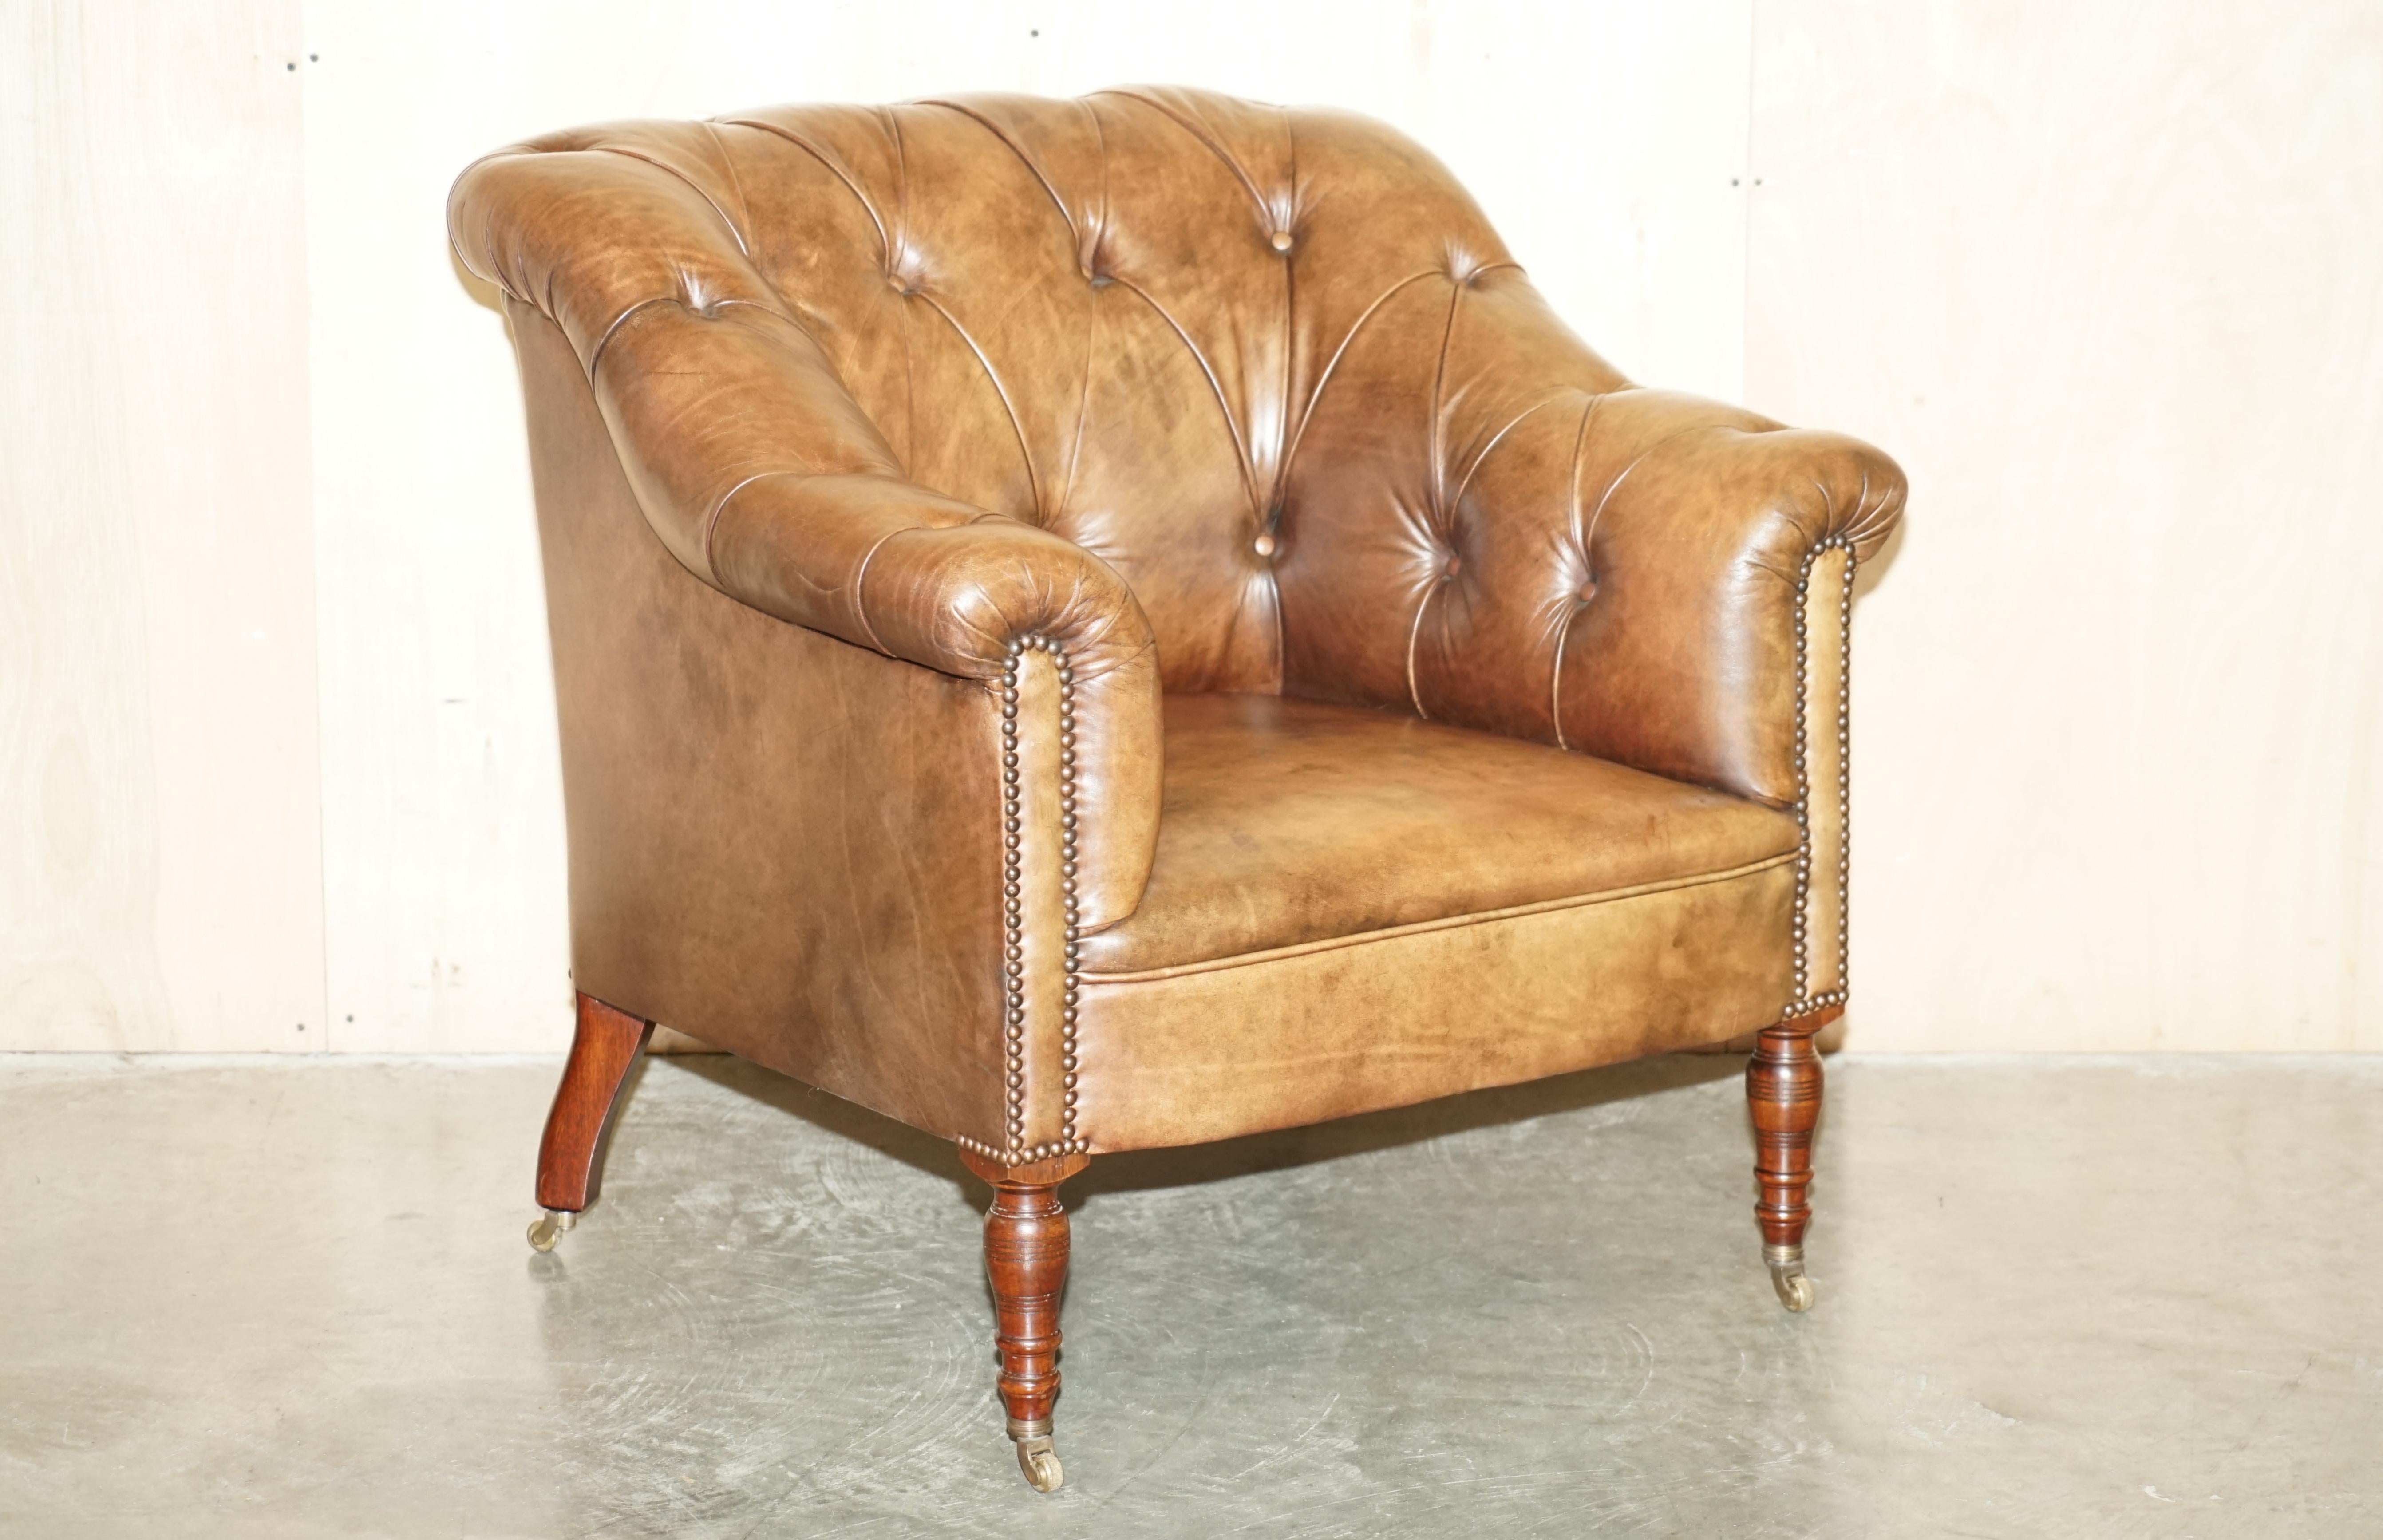 Royal House Antiques

Royal House Antiques is delighted to offer for sale this stunning George Smith cigar brown Somerville occasional Library armchair with Chesterfield tufted back RRP £7,950

Please note the delivery fee listed is just a guide, it